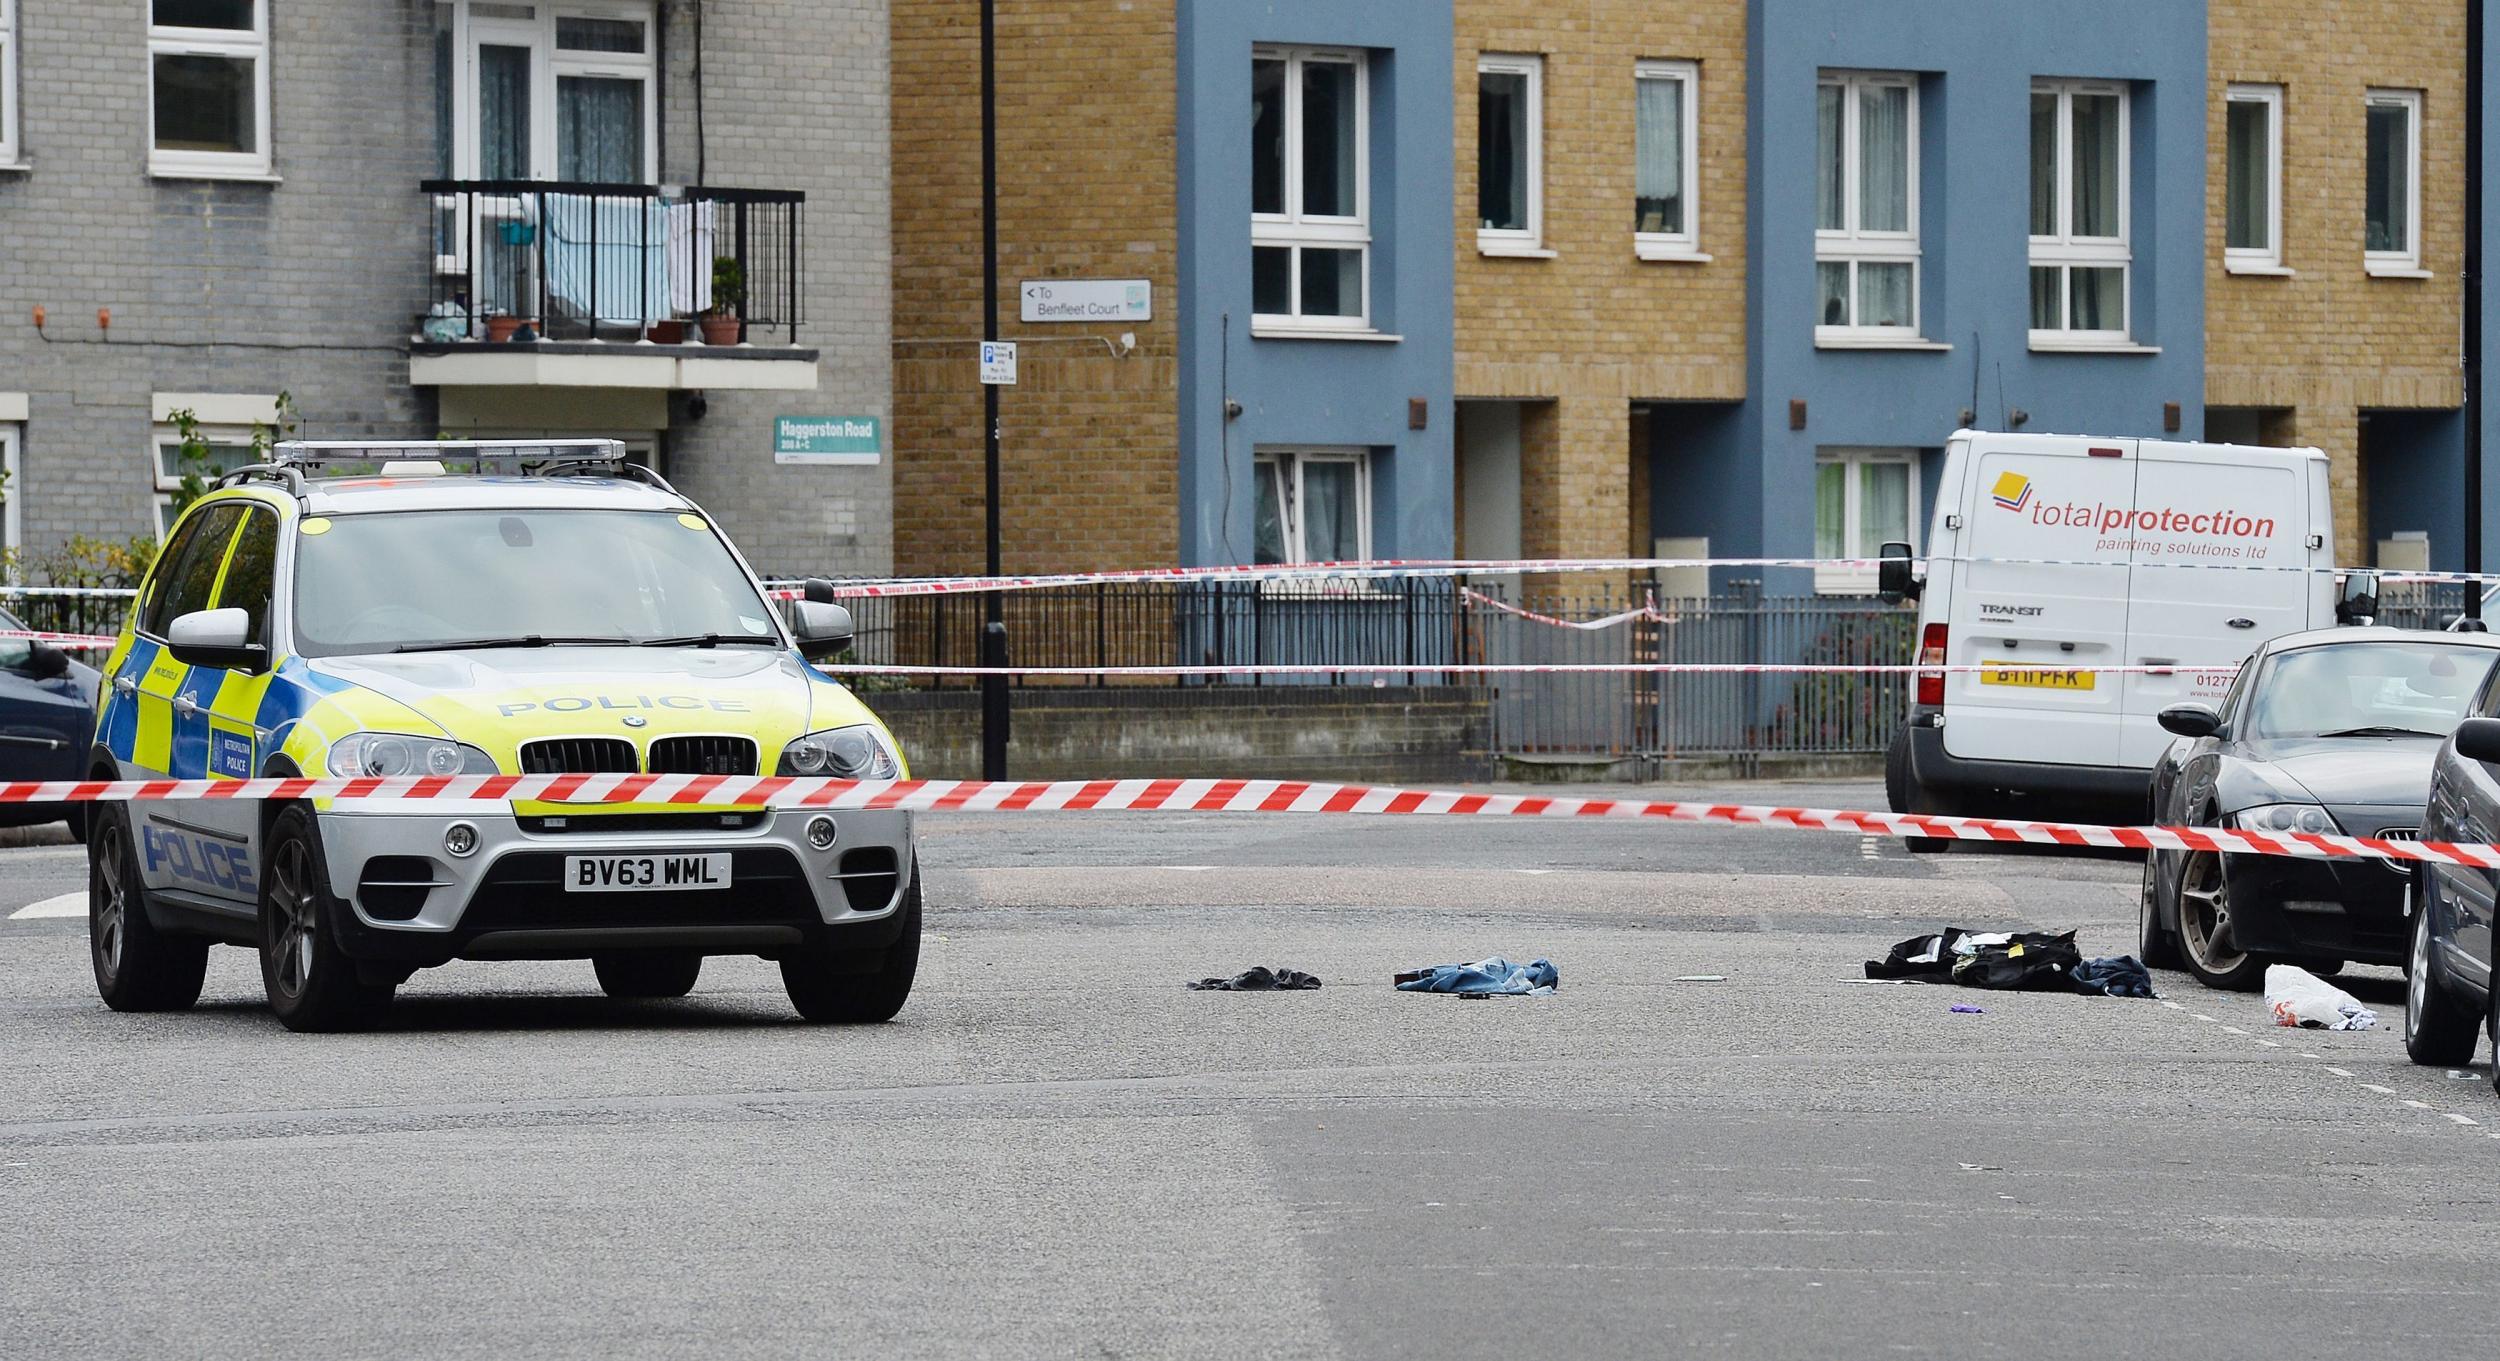 The scene following the shooting in Hackney